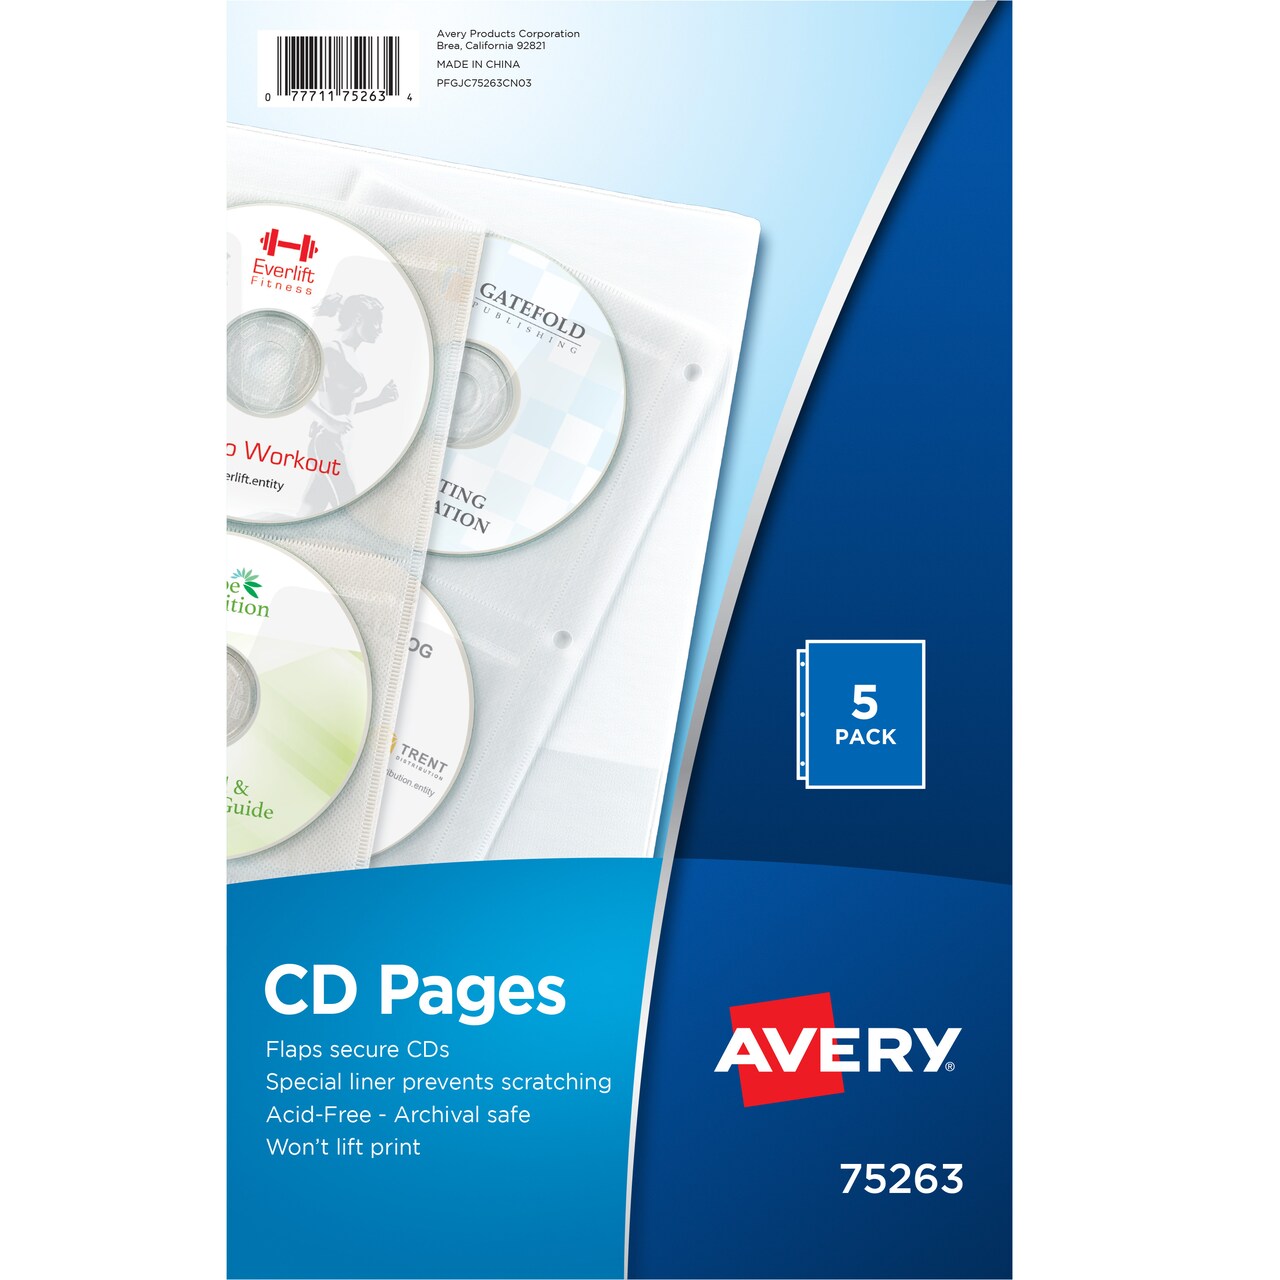 Avery Clear DVD Storage Sleeves for 3 Ring Binder, Two-Sided, Pack of 5  Holds 20 CD/DVDs Total (75263)